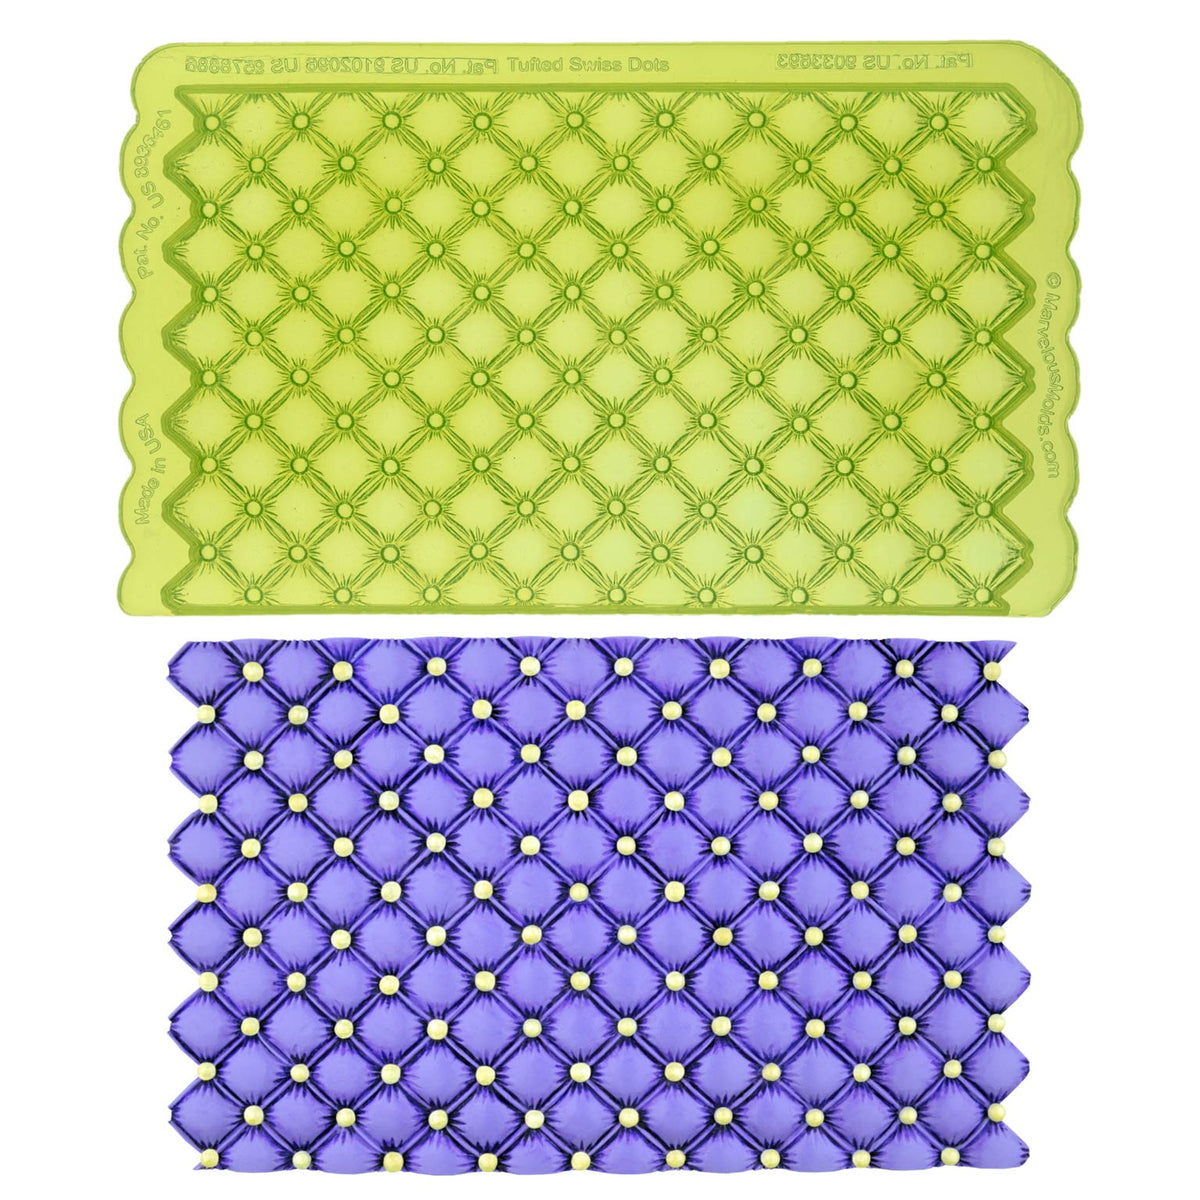 Tufted Swiss Dot Food Safe Silicone Simpress Mold for Fondant Cake Decorating by Marvelous Molds